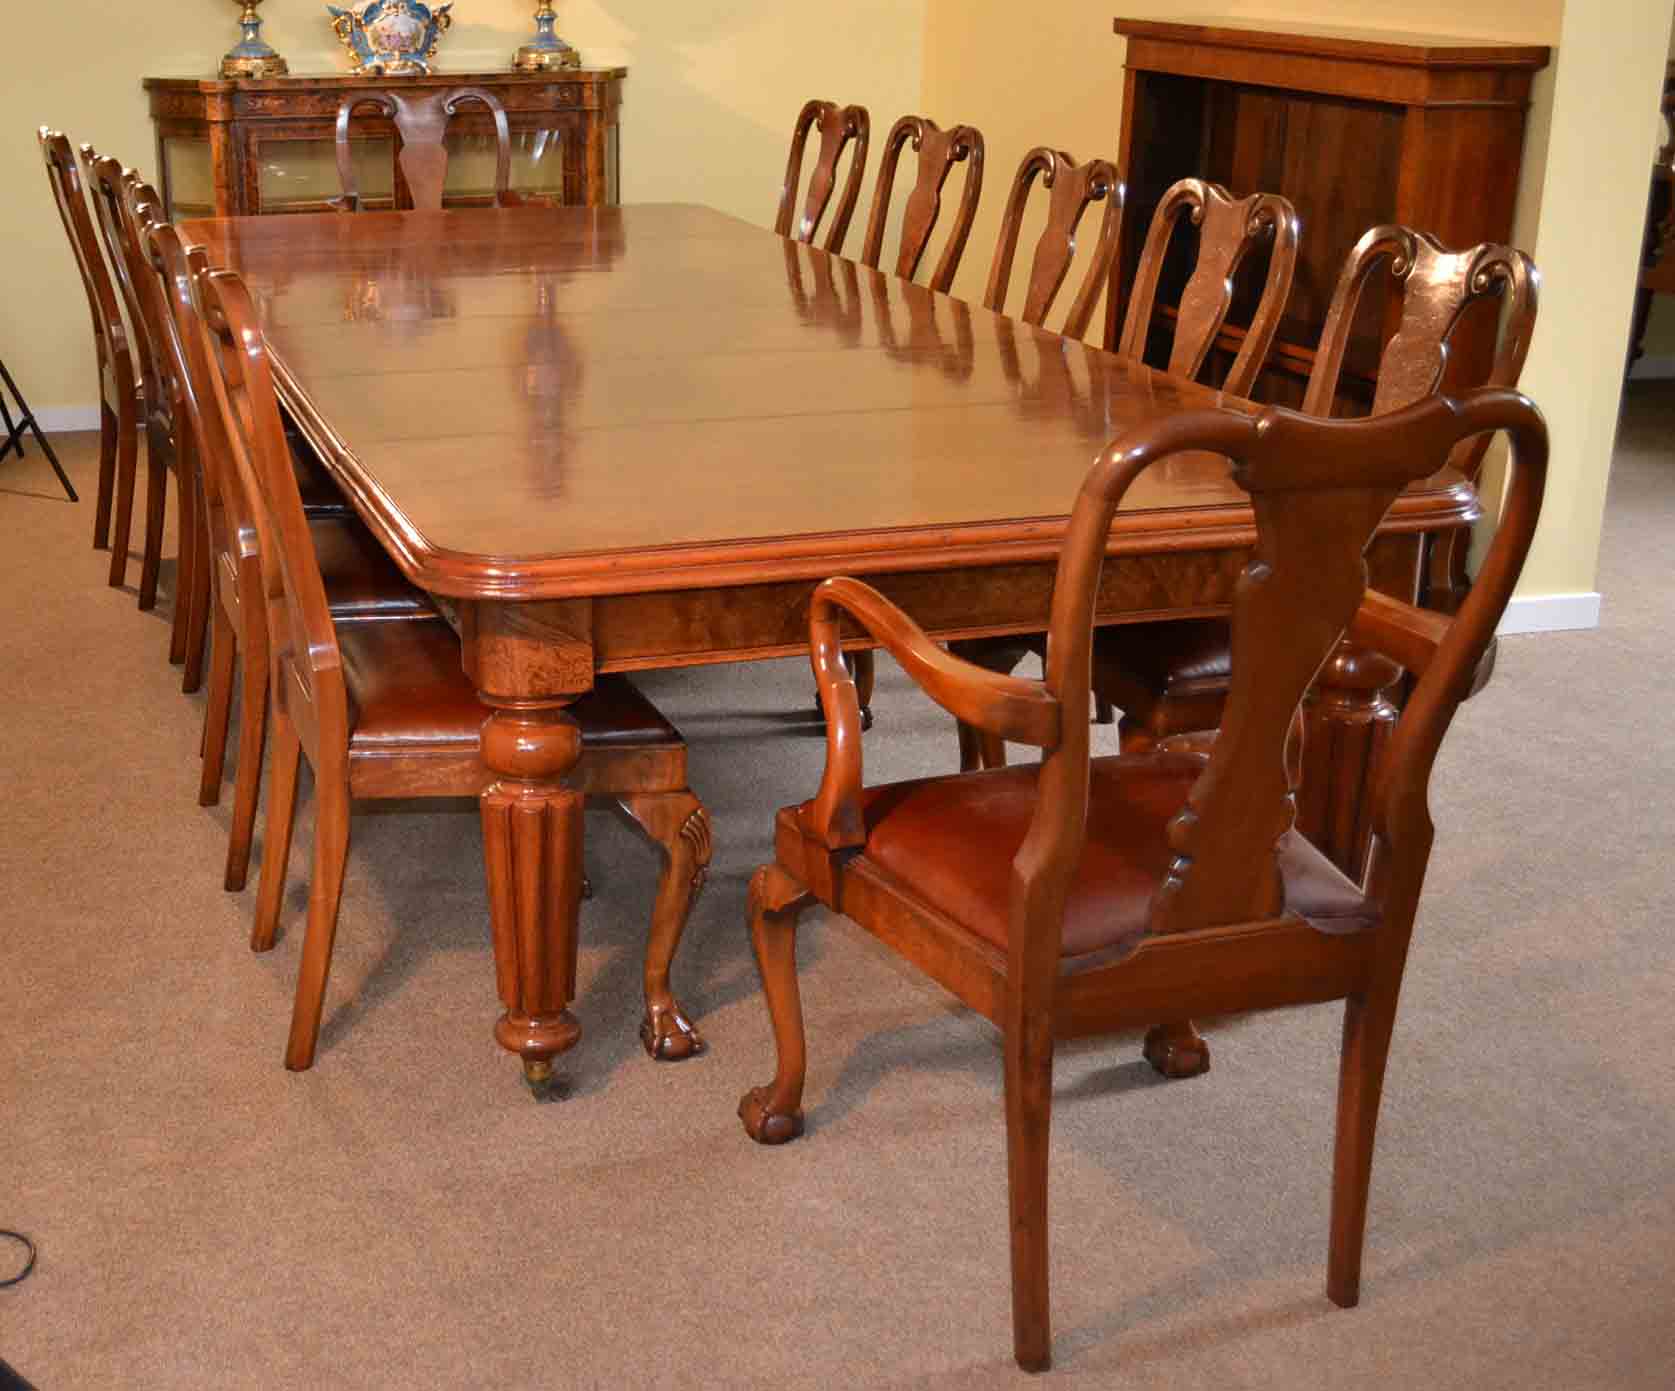 Antique Dining Room Table Seats 12